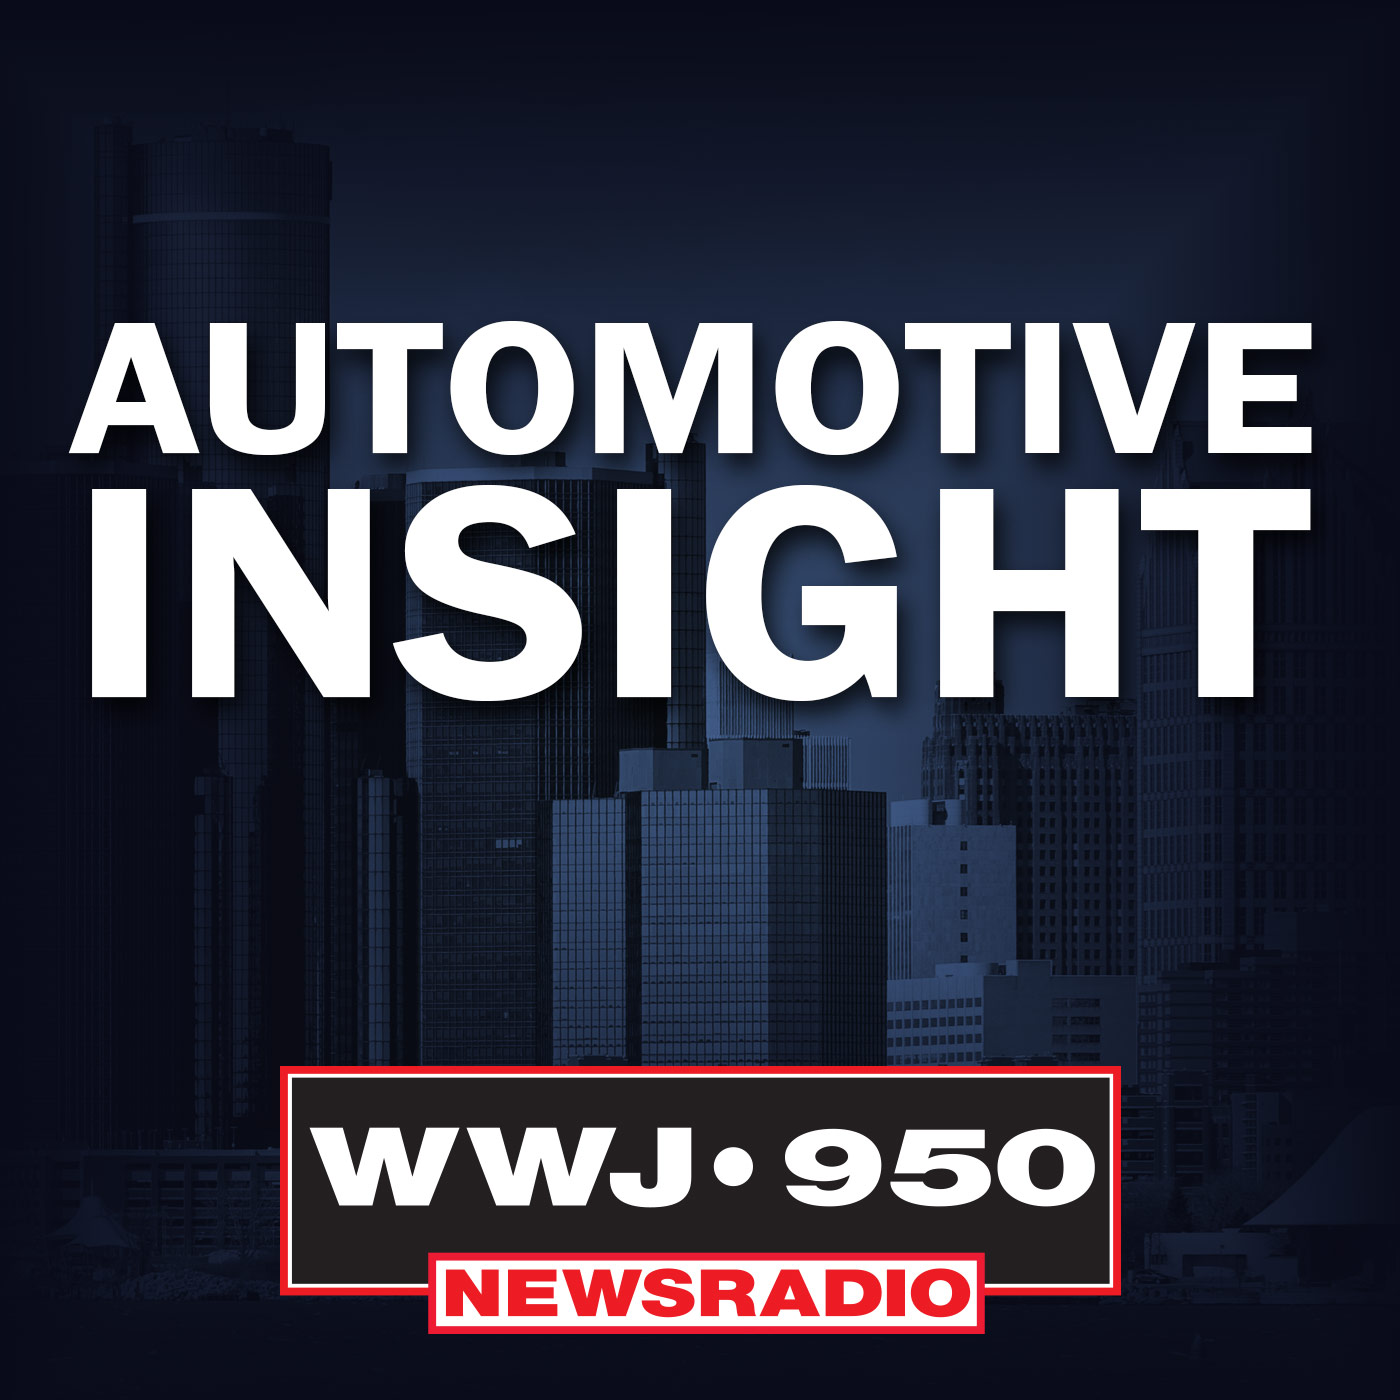 Automotive Insight: The cost of cars, trucks, SUVs going up